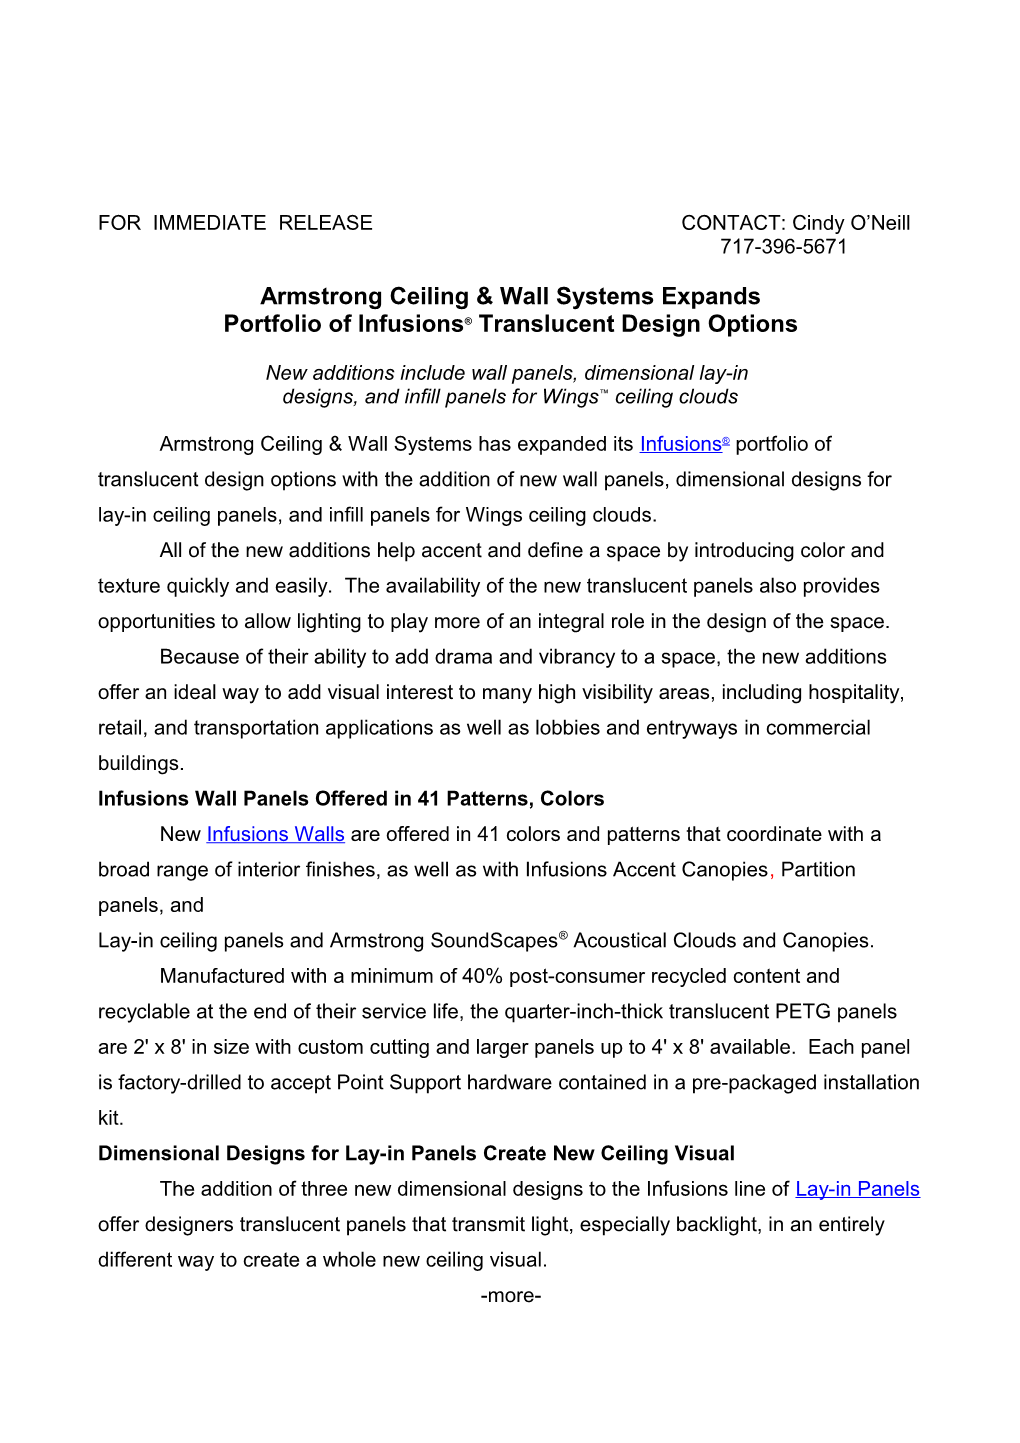 Armstrong Ceiling & Wall Systems Expands